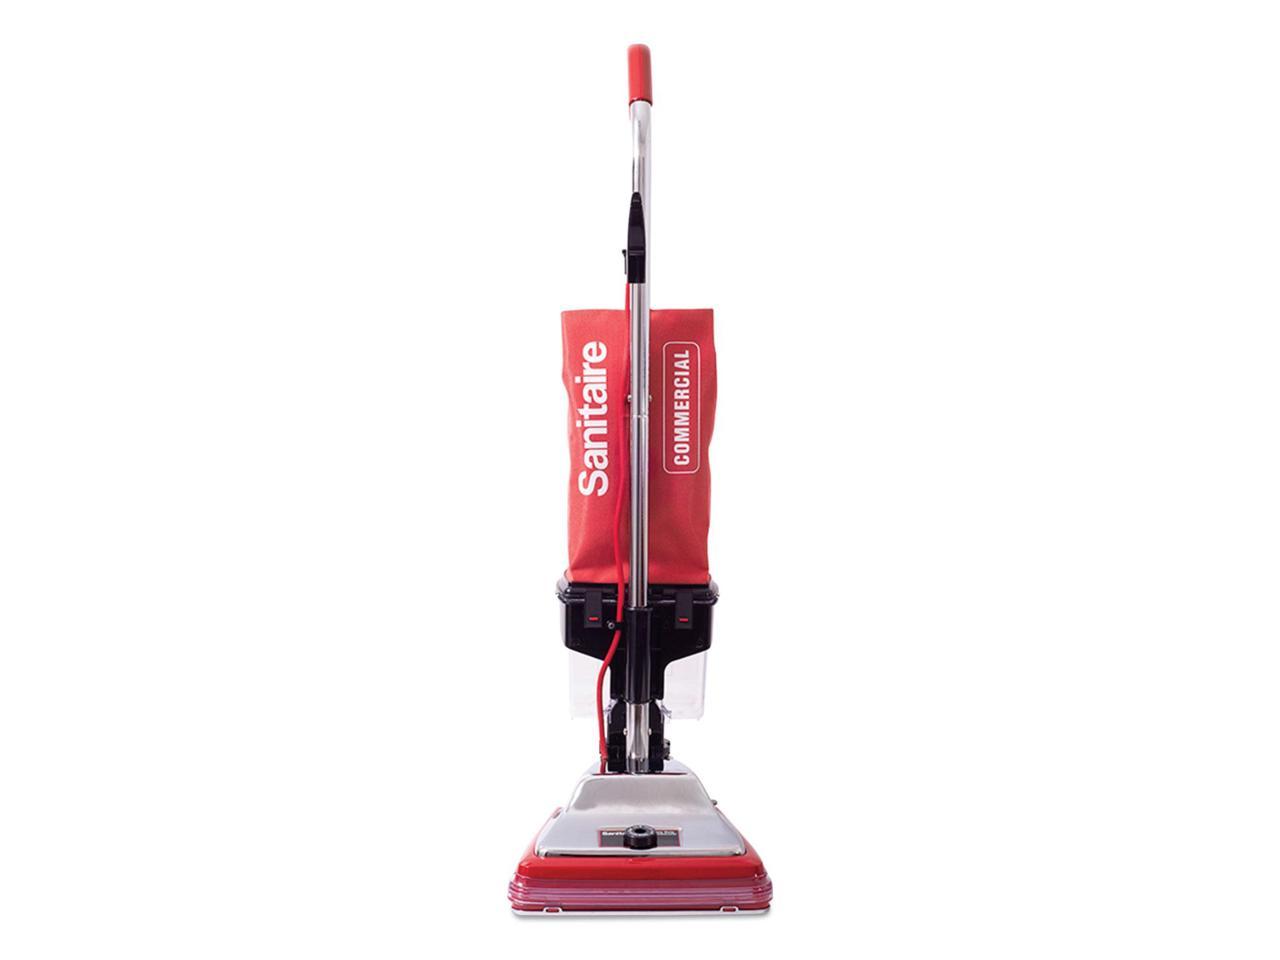 Sanitaire SC887E SC887 Tradition Upright Vacuum Red - image 1 of 2